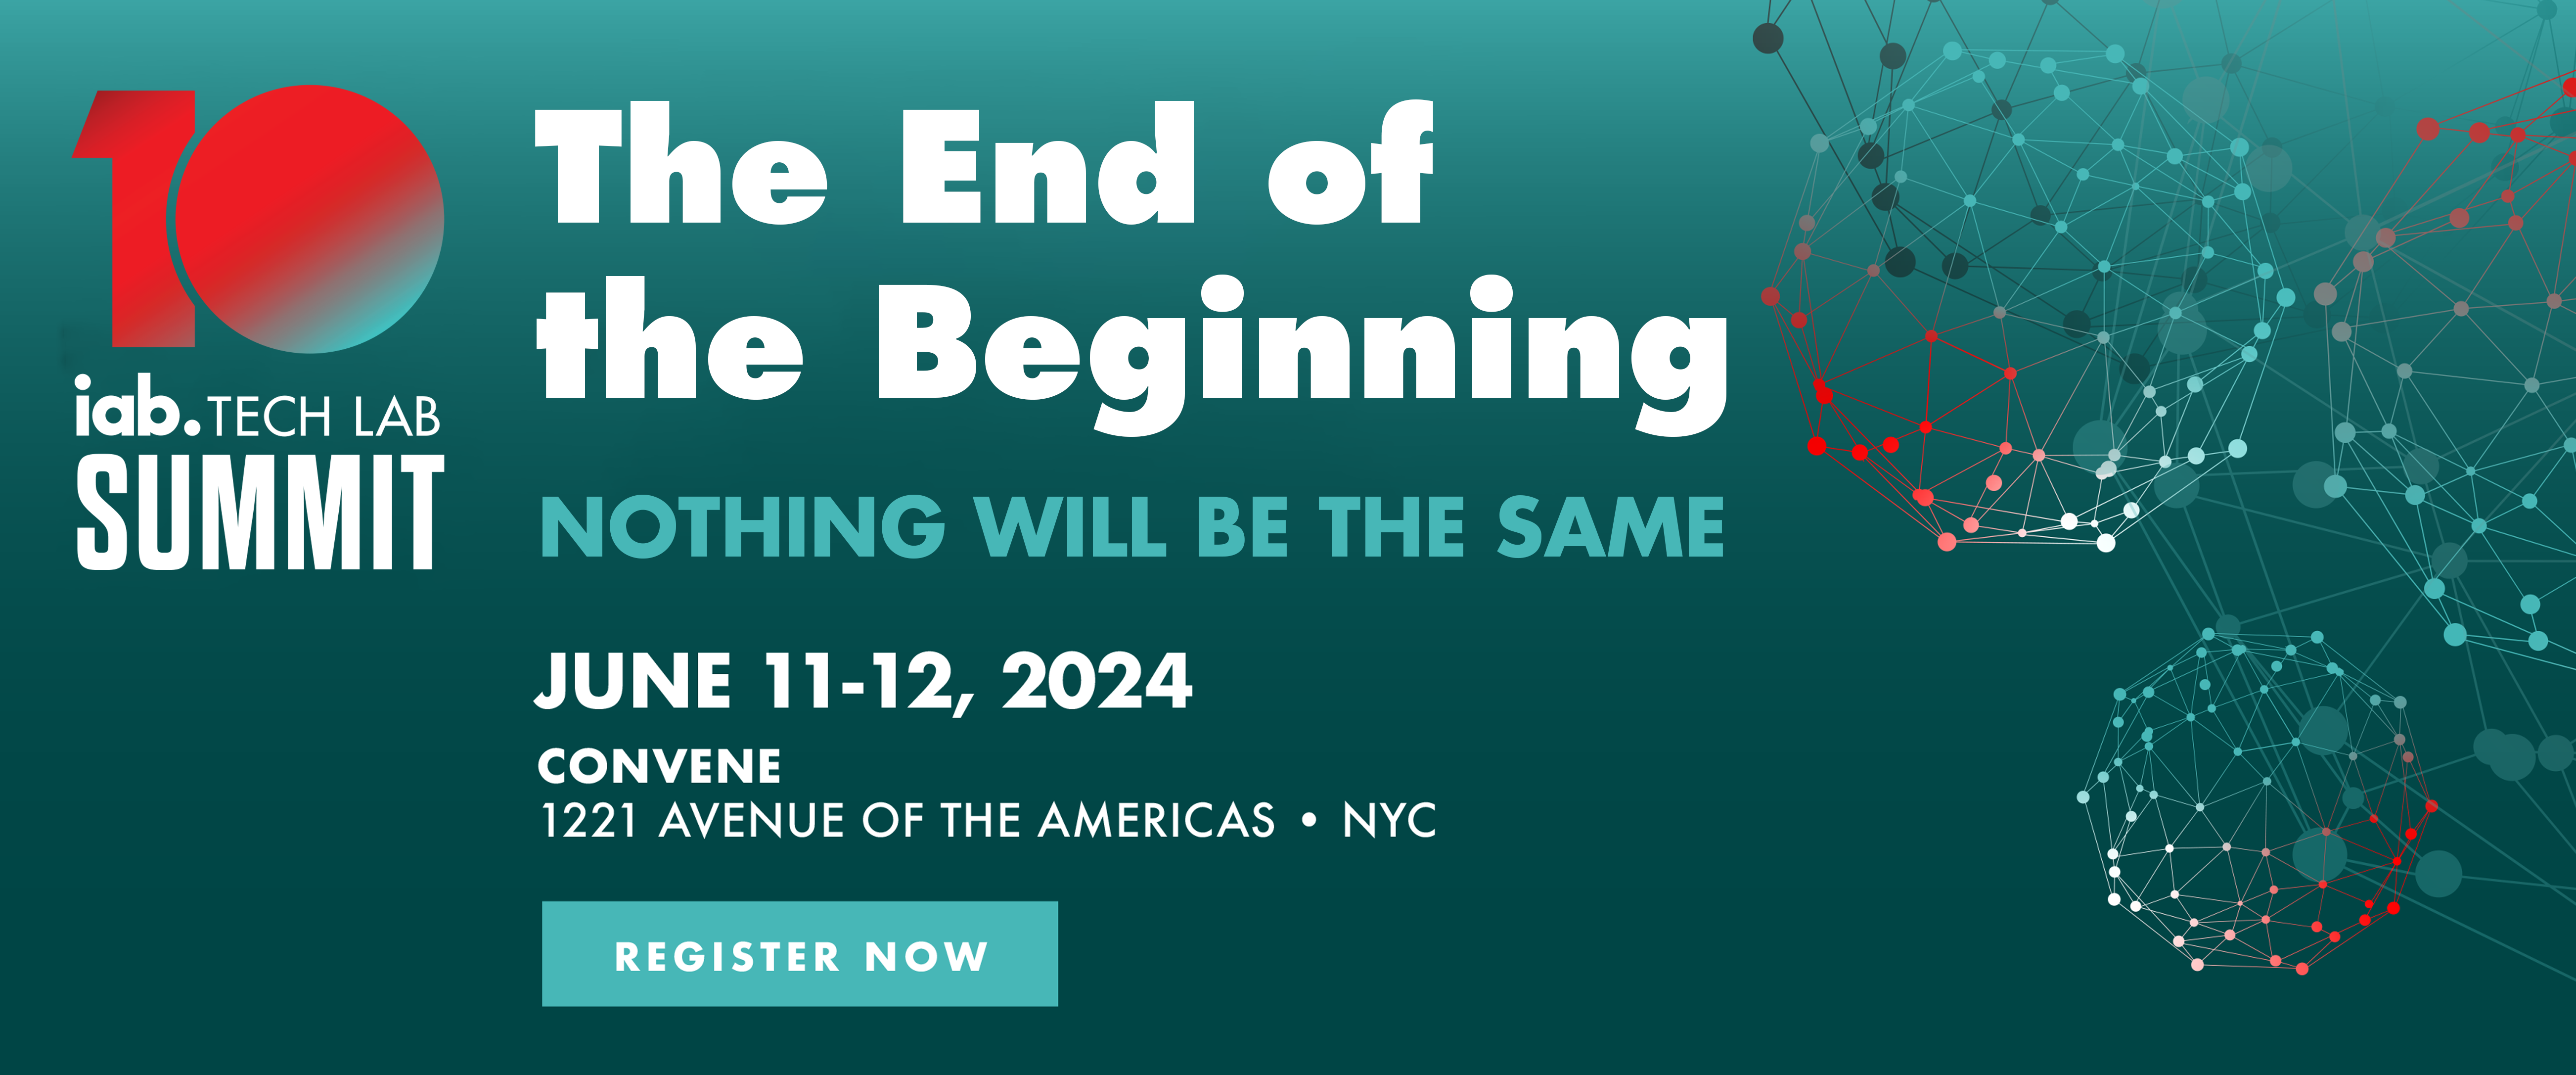 Tech Lab Summit, 10 Year Anniversary, “The End Of The Beginning: Nothing Will Be The Same”